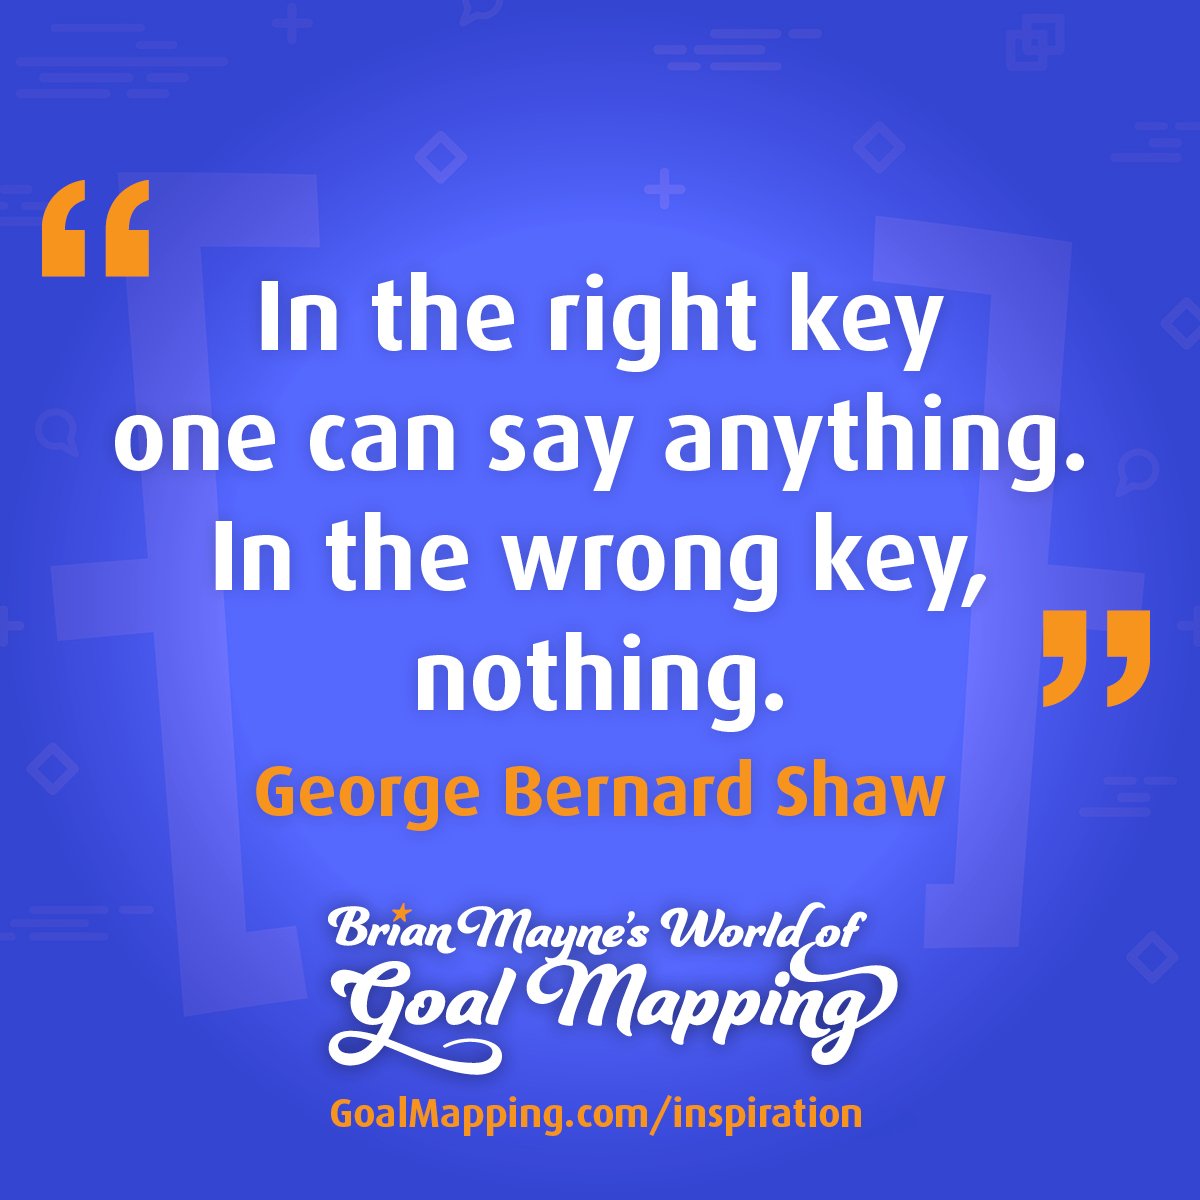 "In the right key one can say anything. In the wrong key, nothing." George Bernard Shaw